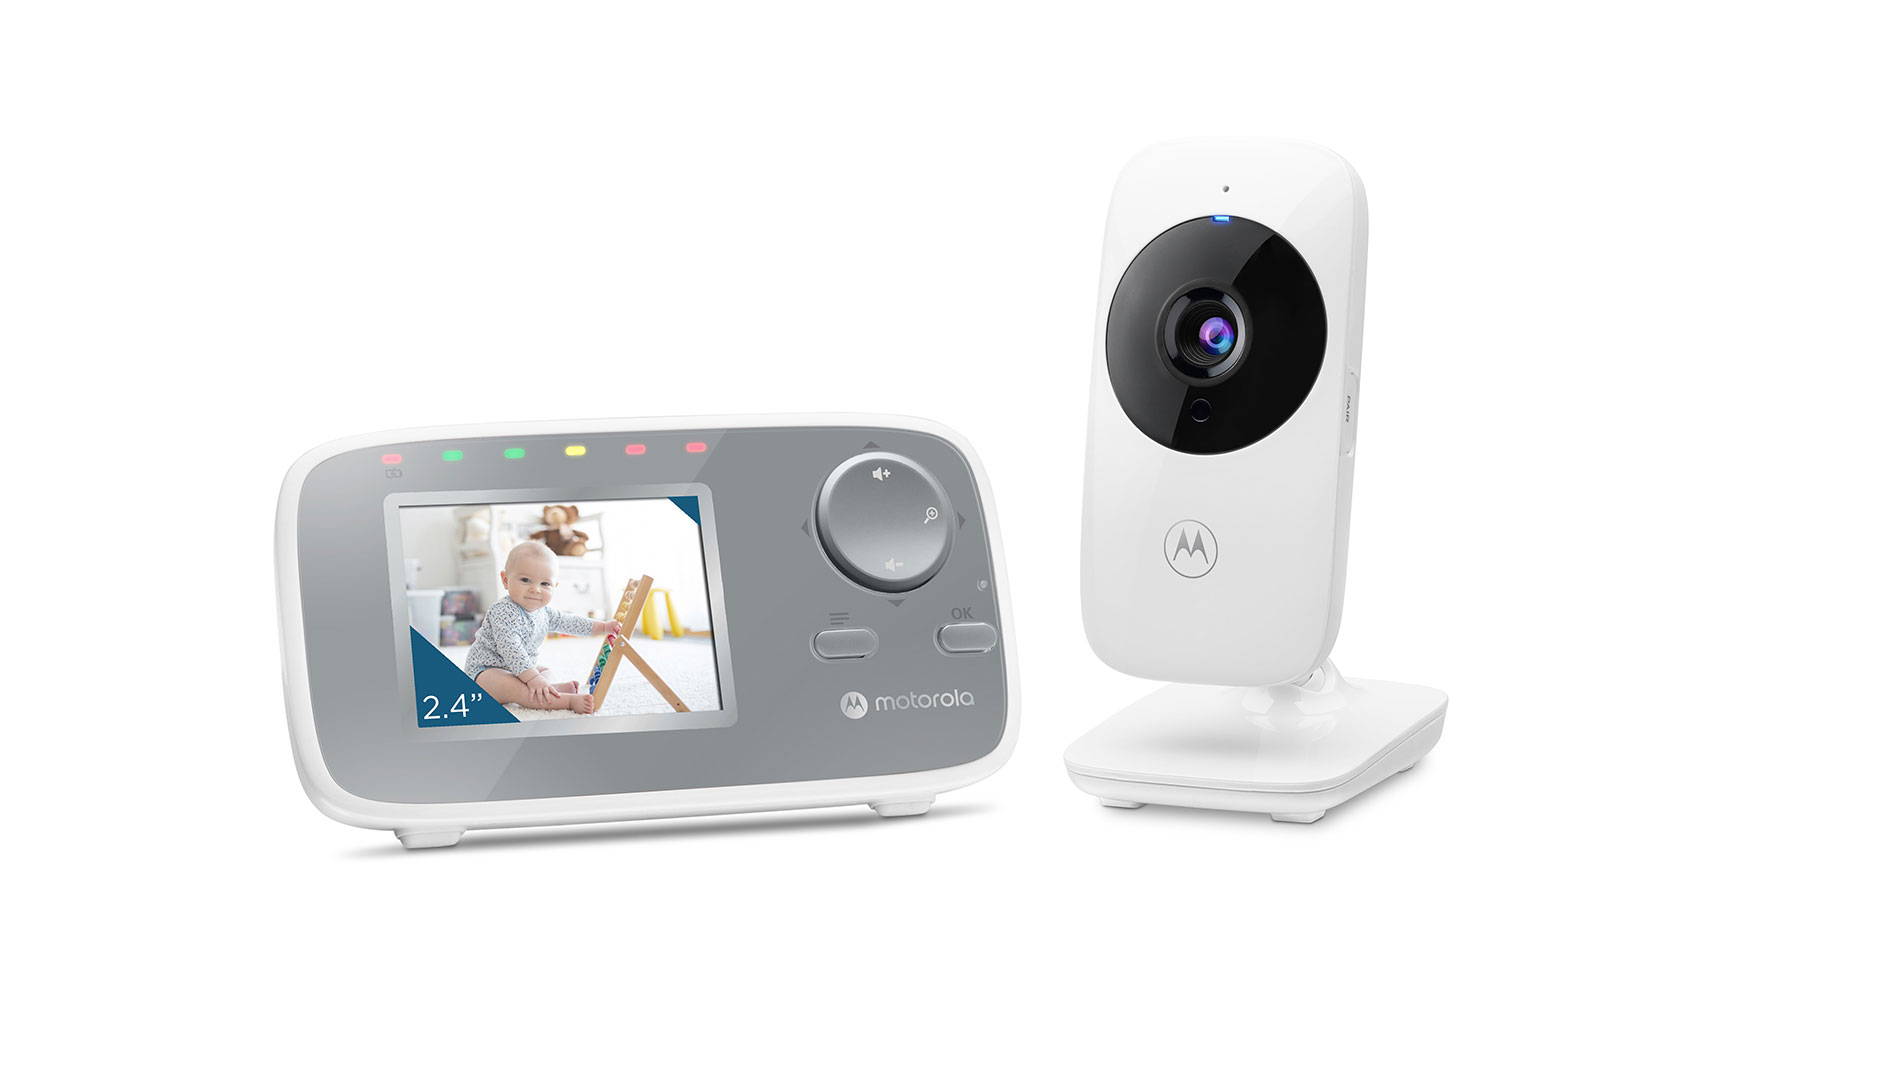 VM482 2.4 inch Video Baby Monitor - Product image